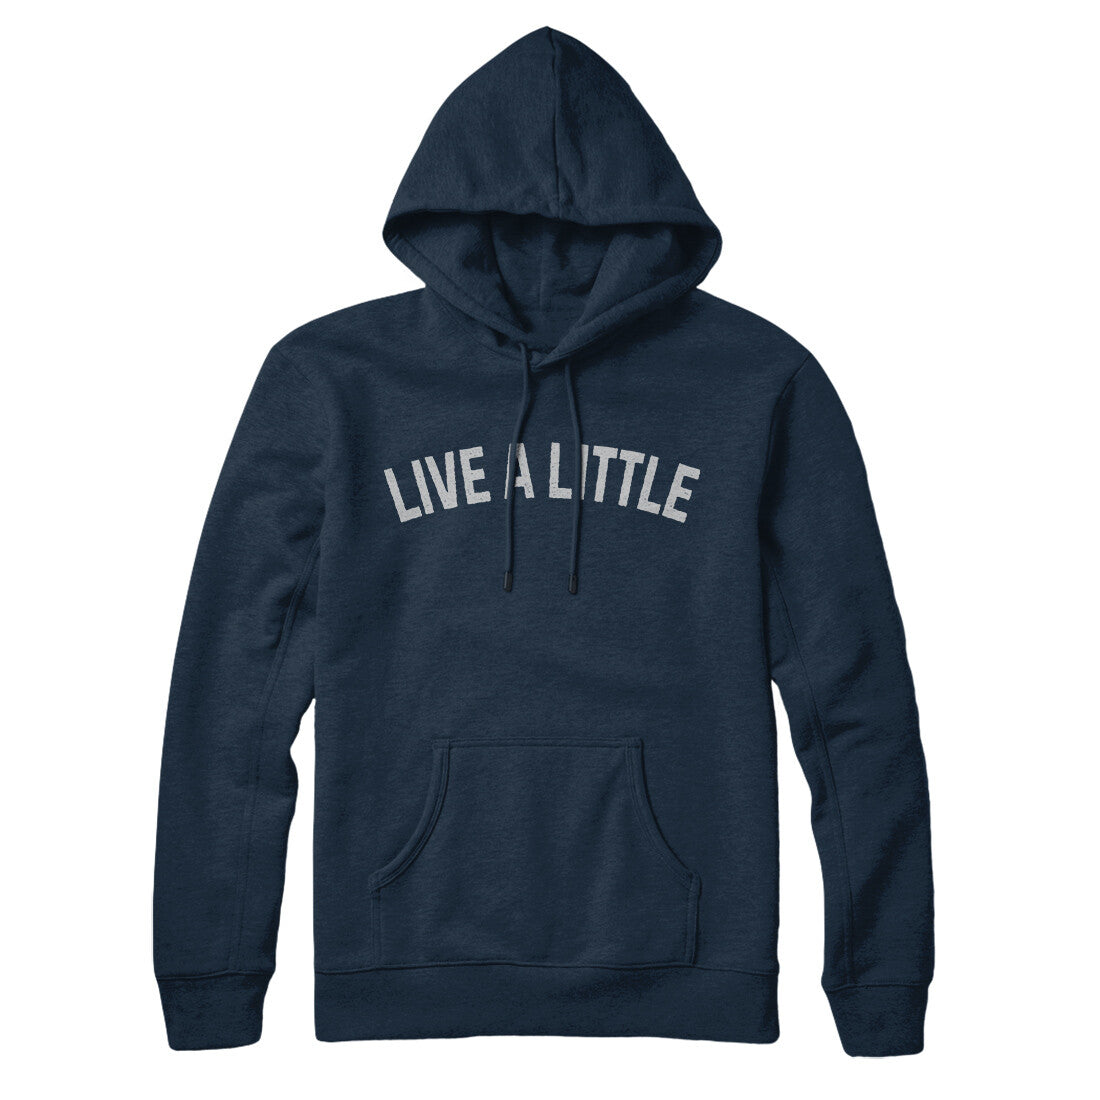 Live a Little in Navy Blue Color